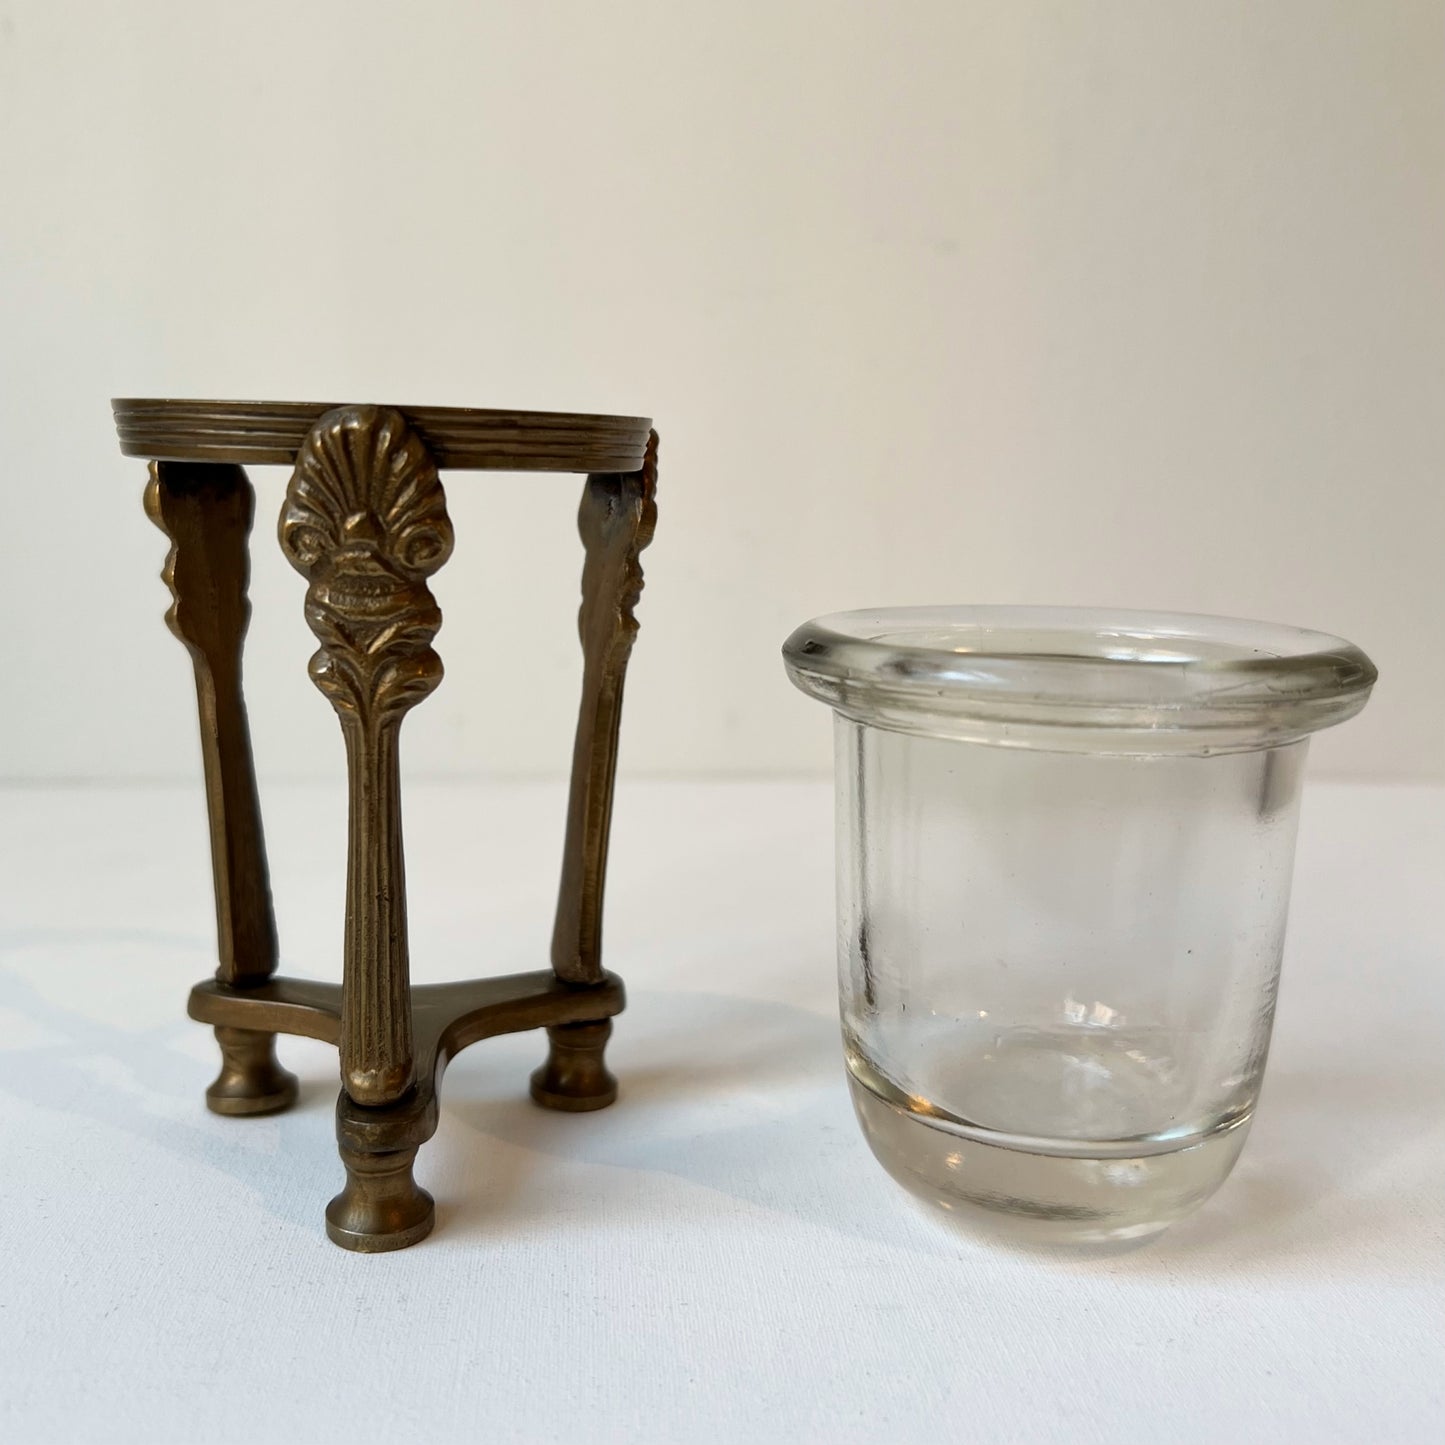 【Vintage】Germany - 1940s Brass Candle Holder Stand With Glass Insert